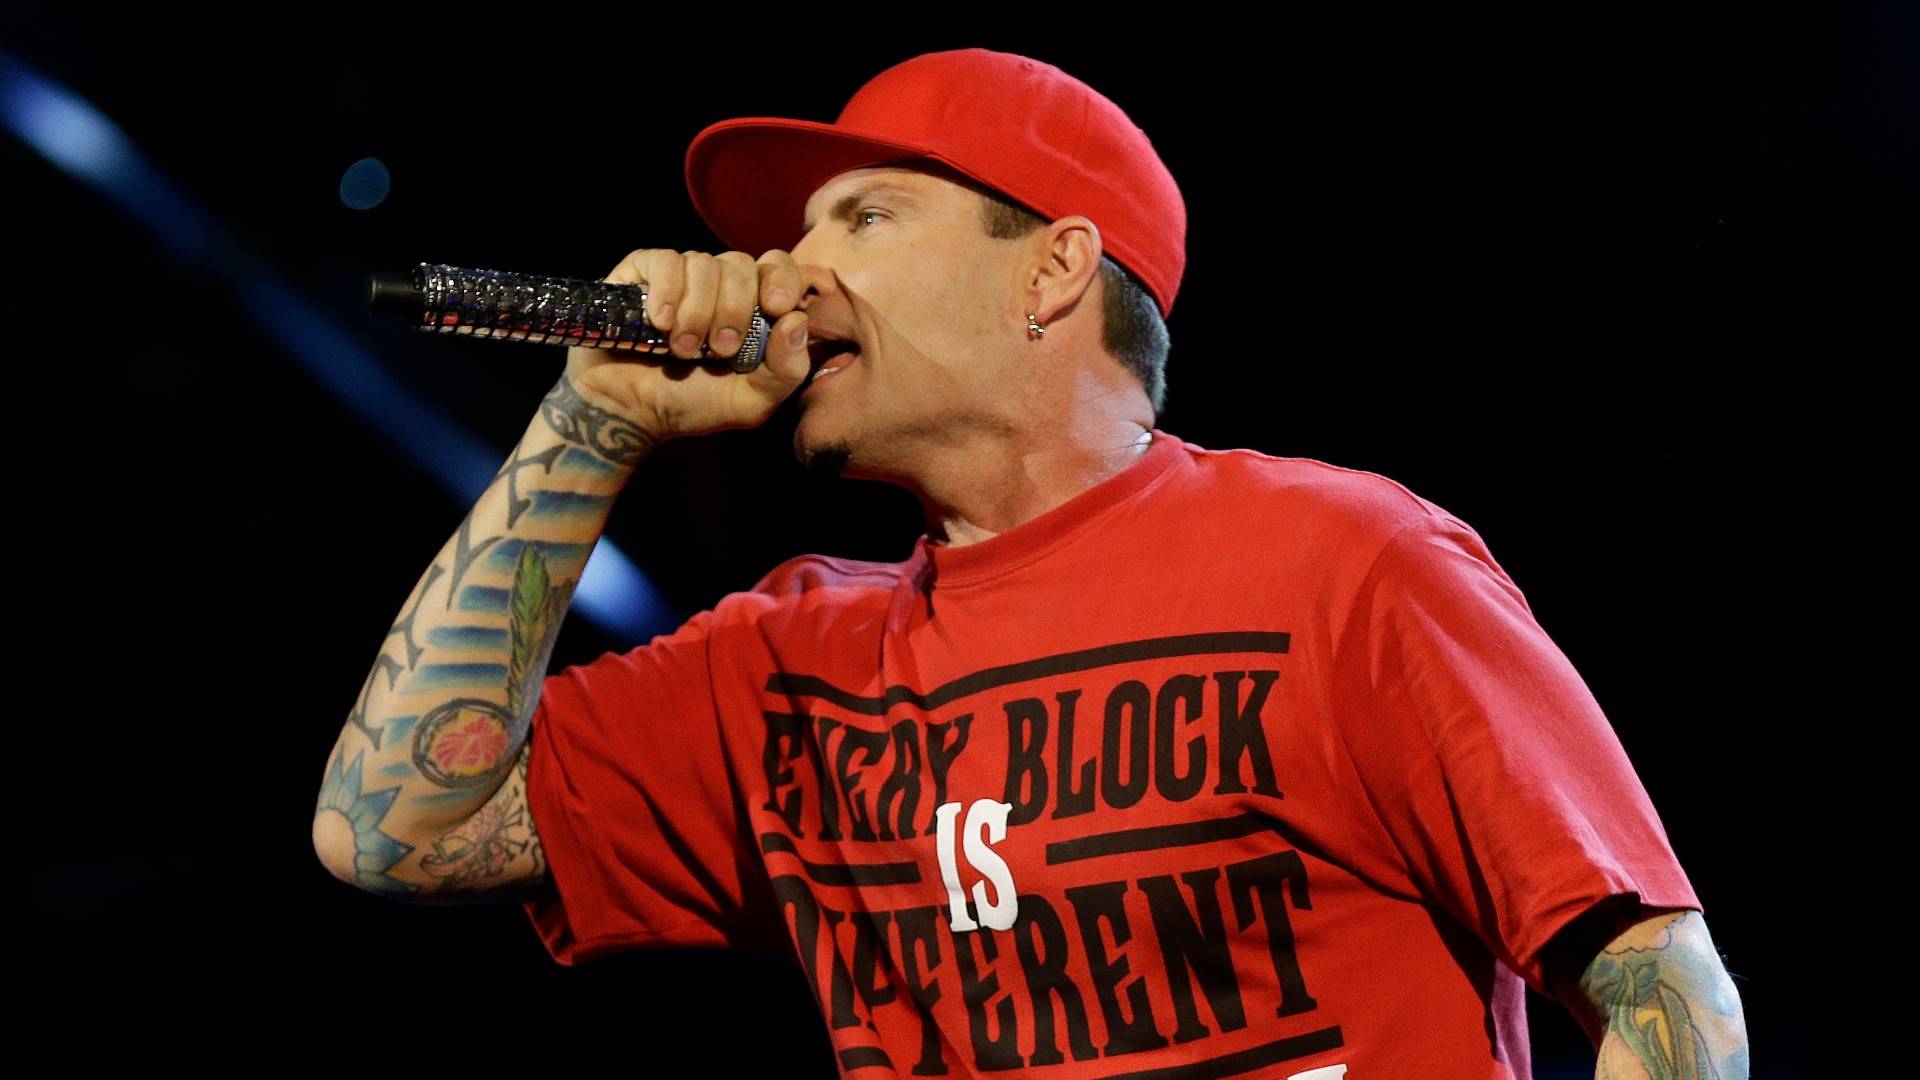 Sources tell First Coast News Vanilla Ice plans on keeping one home and "flip" the other as part of his television show; both are located on Rattlesnake Island.